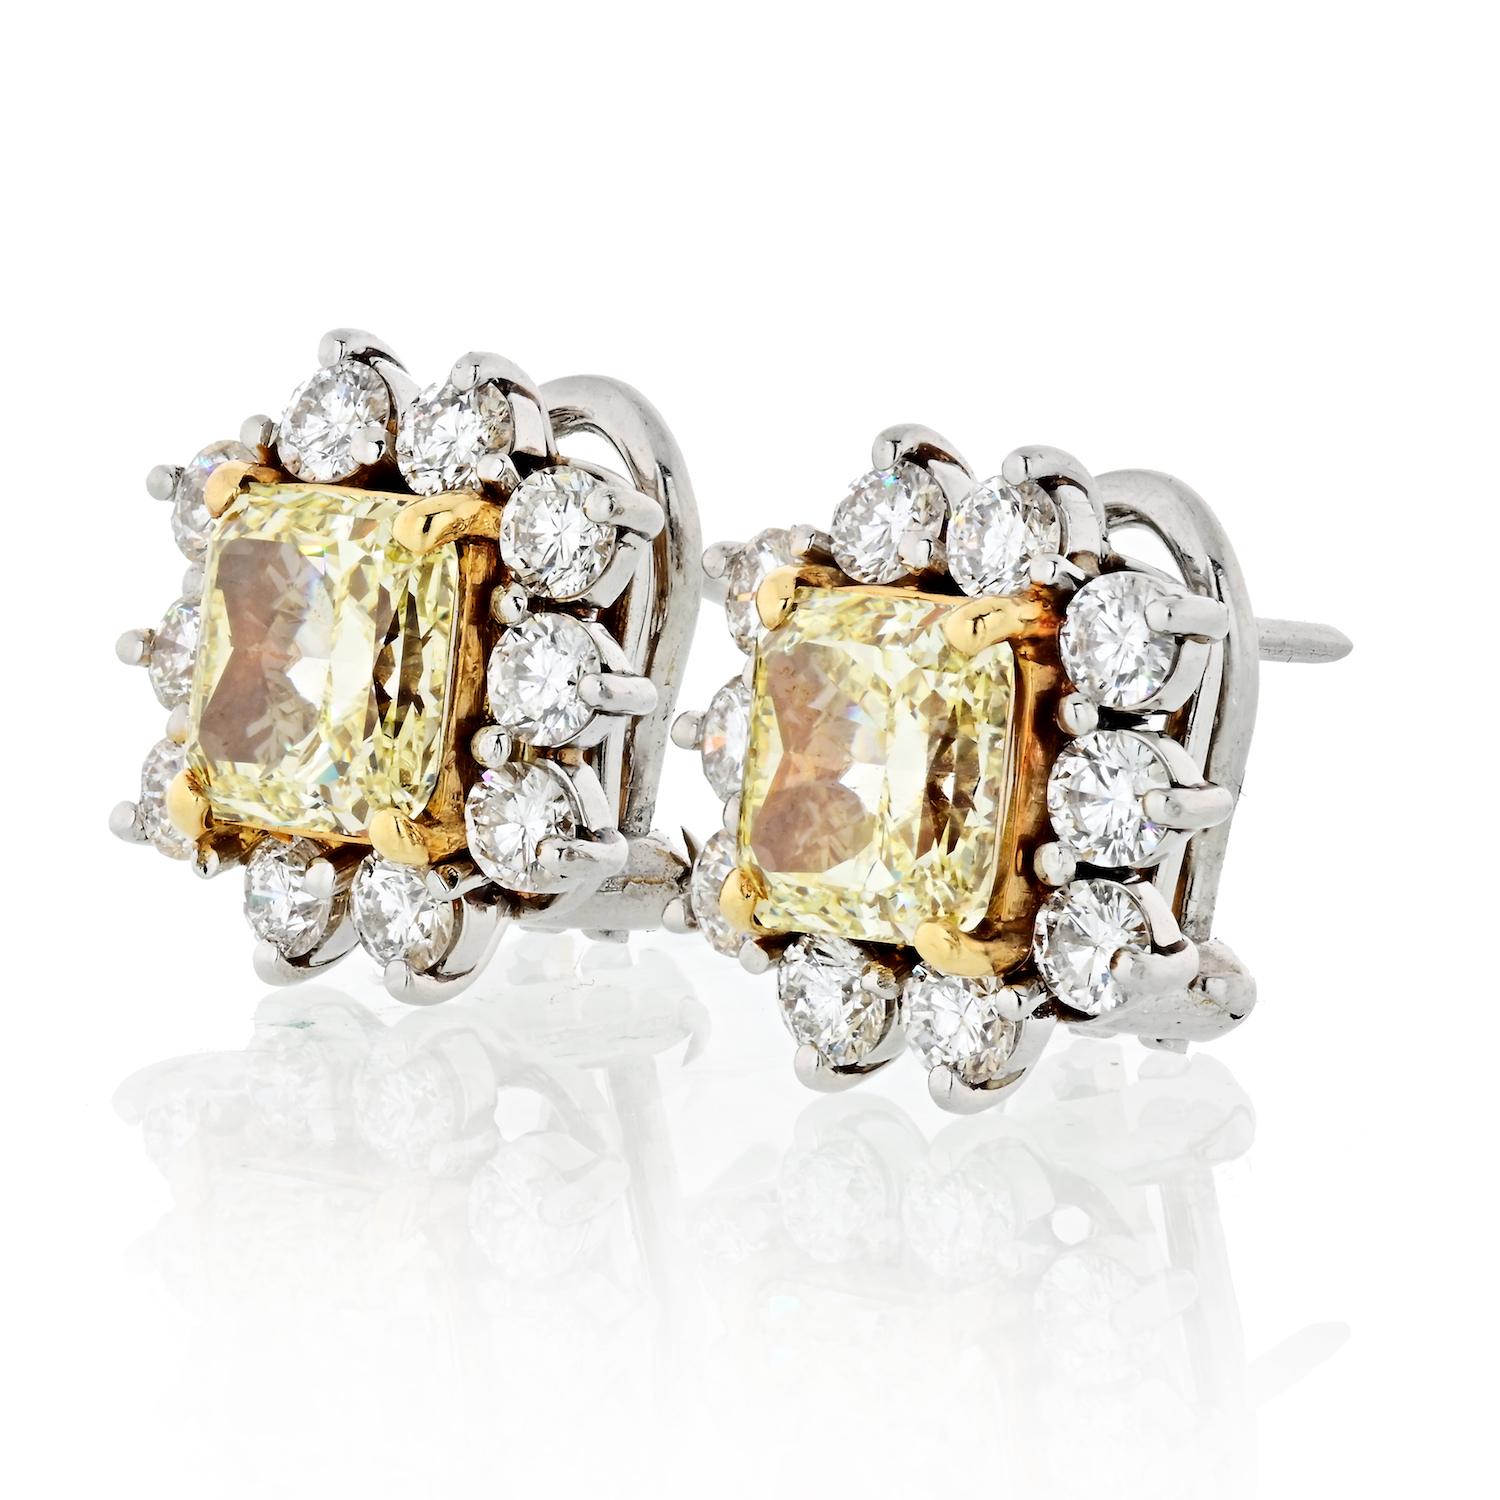 An exceptional matched pair of fancy yellow radiant cut diamonds weighing 3.74 carat total. The gemological institute of America certificate states the diamonds are natural fancy color and VVS1 and VVS2 clarity. Colored diamonds that match in both